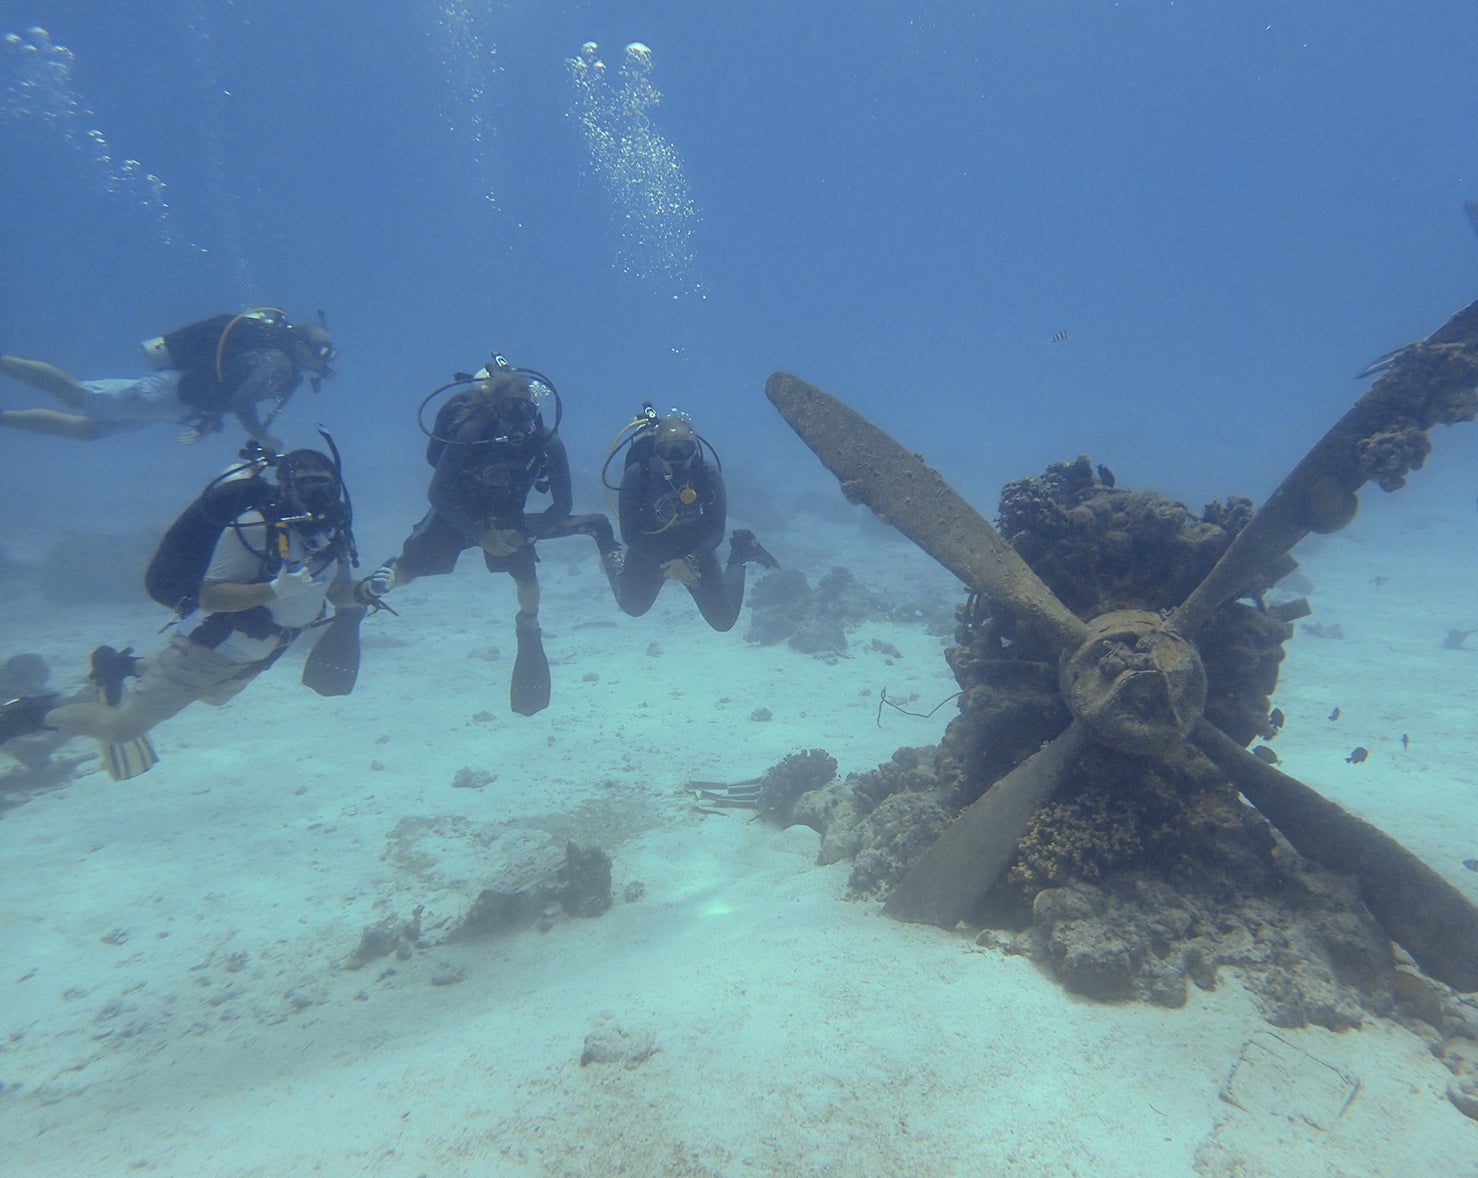 Students and staff visit the wreck site of a Japanese seaplane named “Emily.”